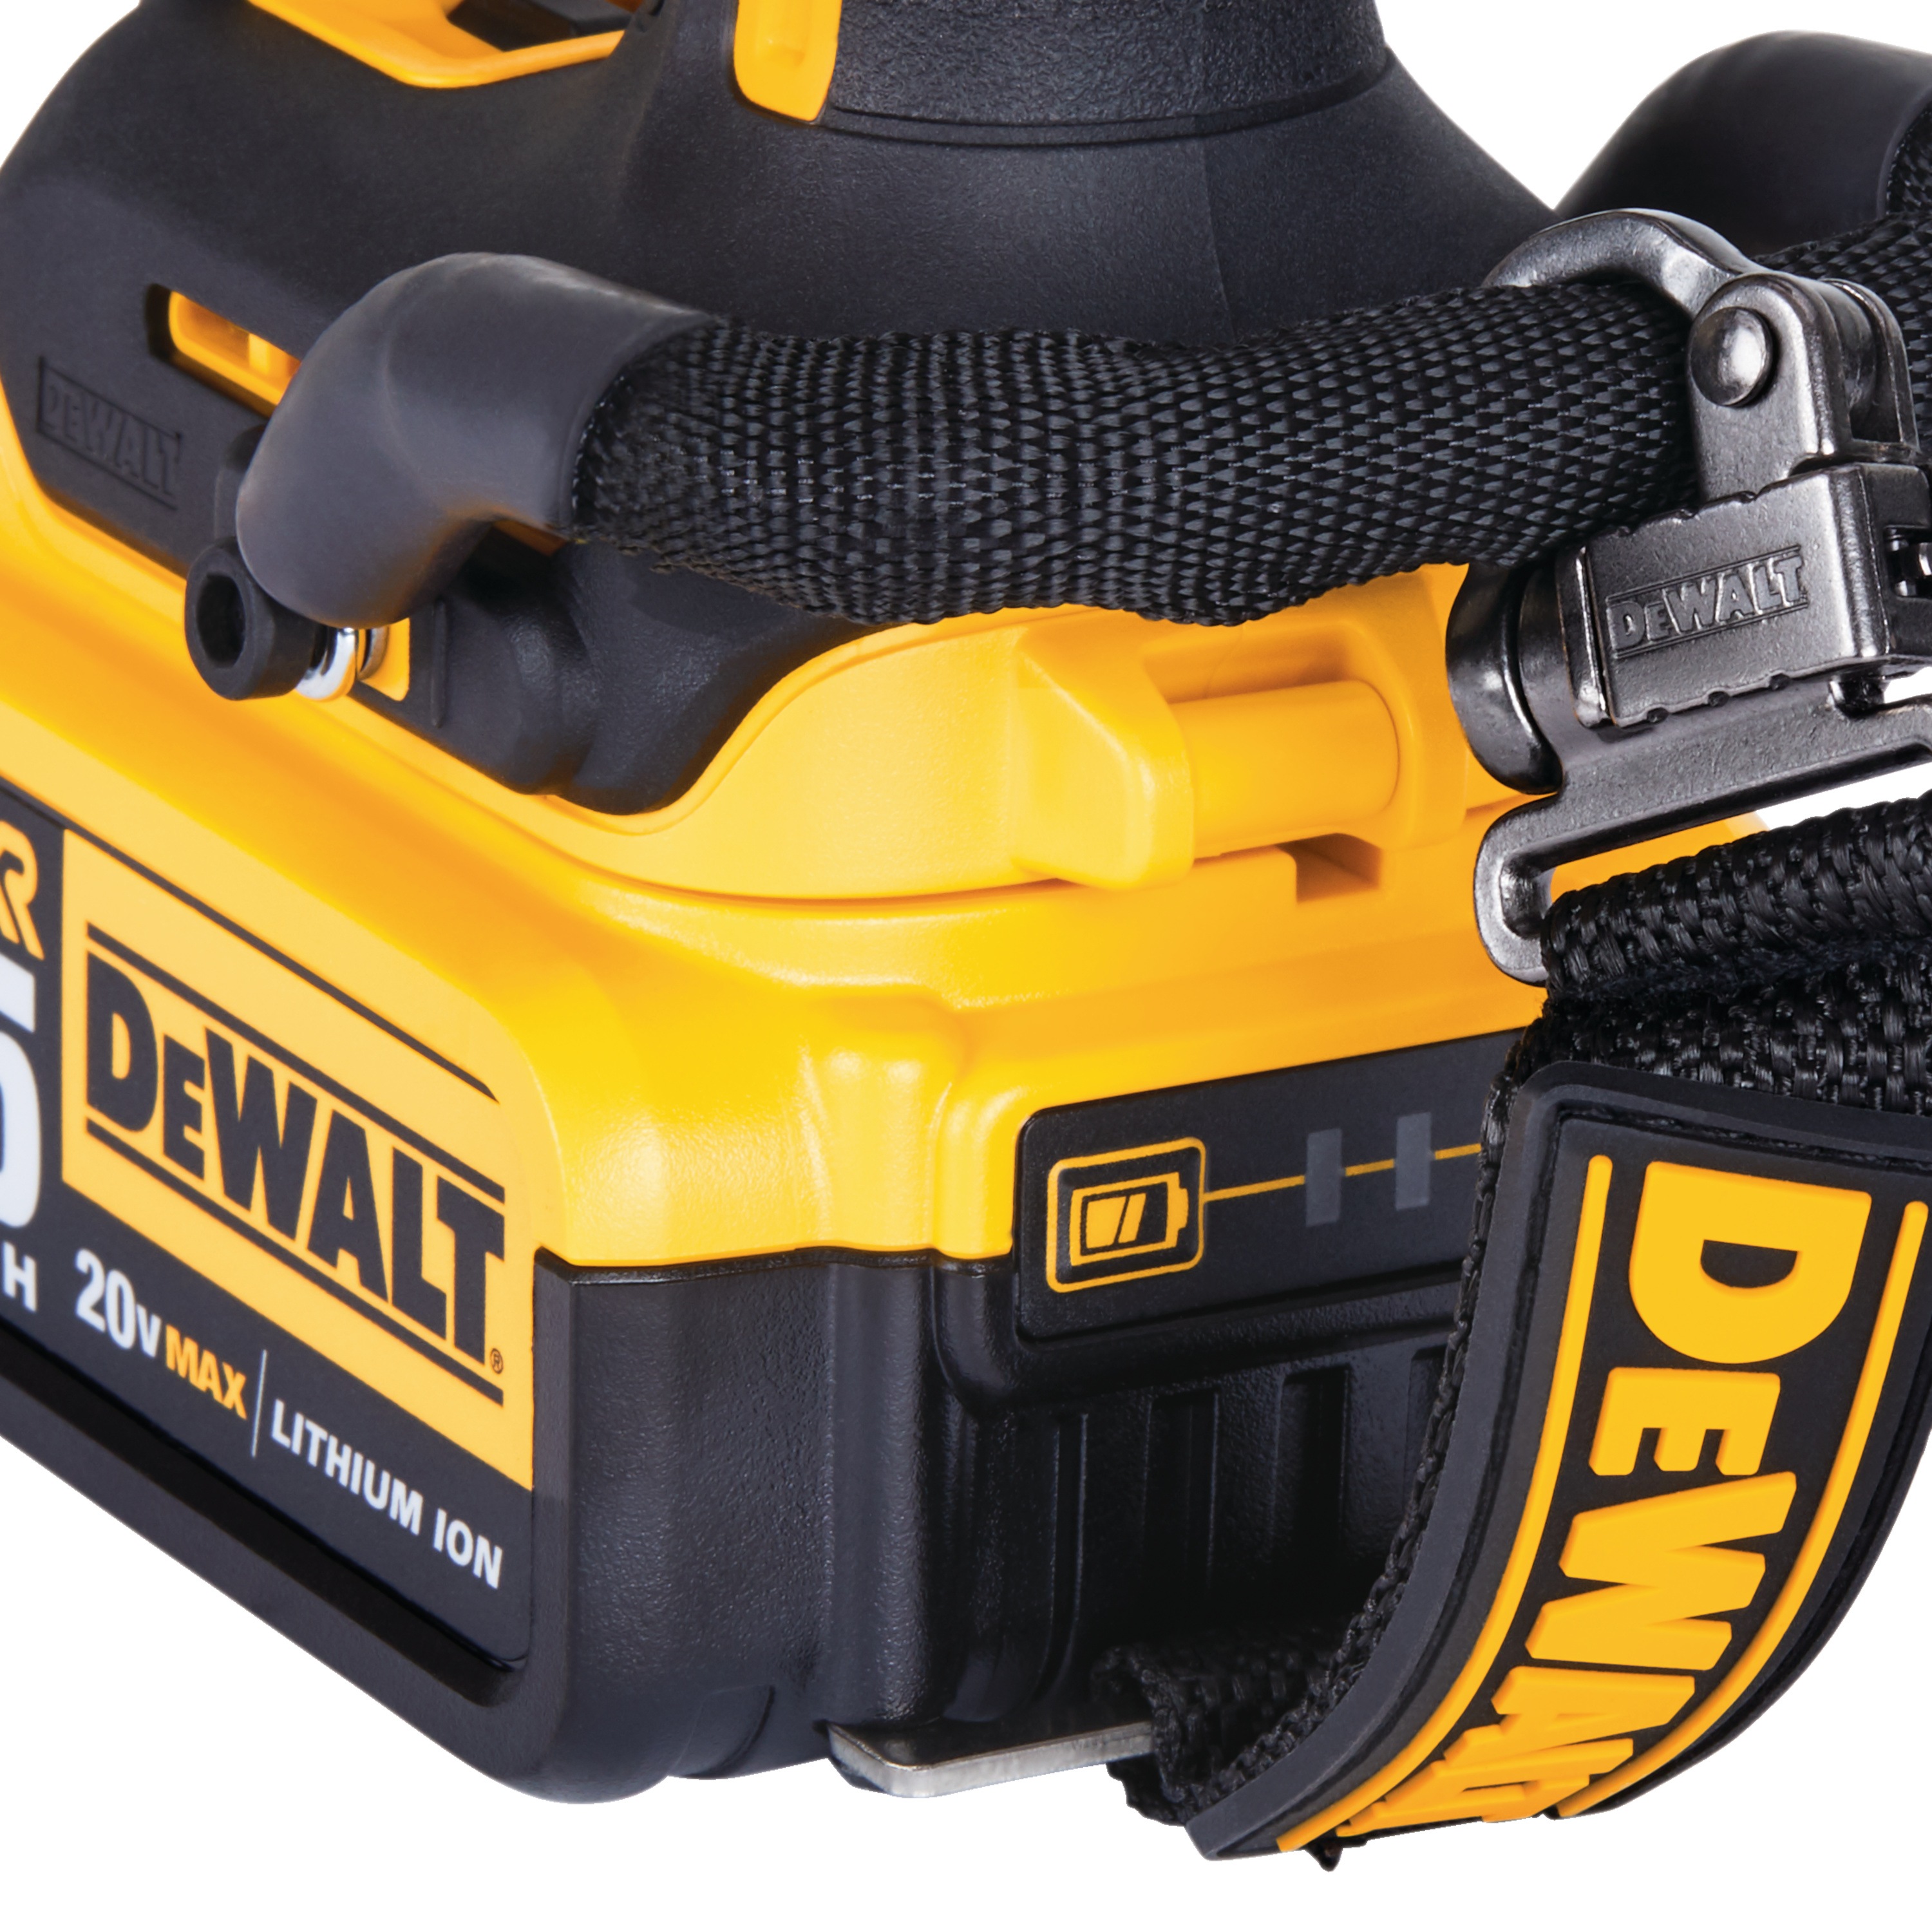 profile of 5 amp hour battery of a XR hammer drill